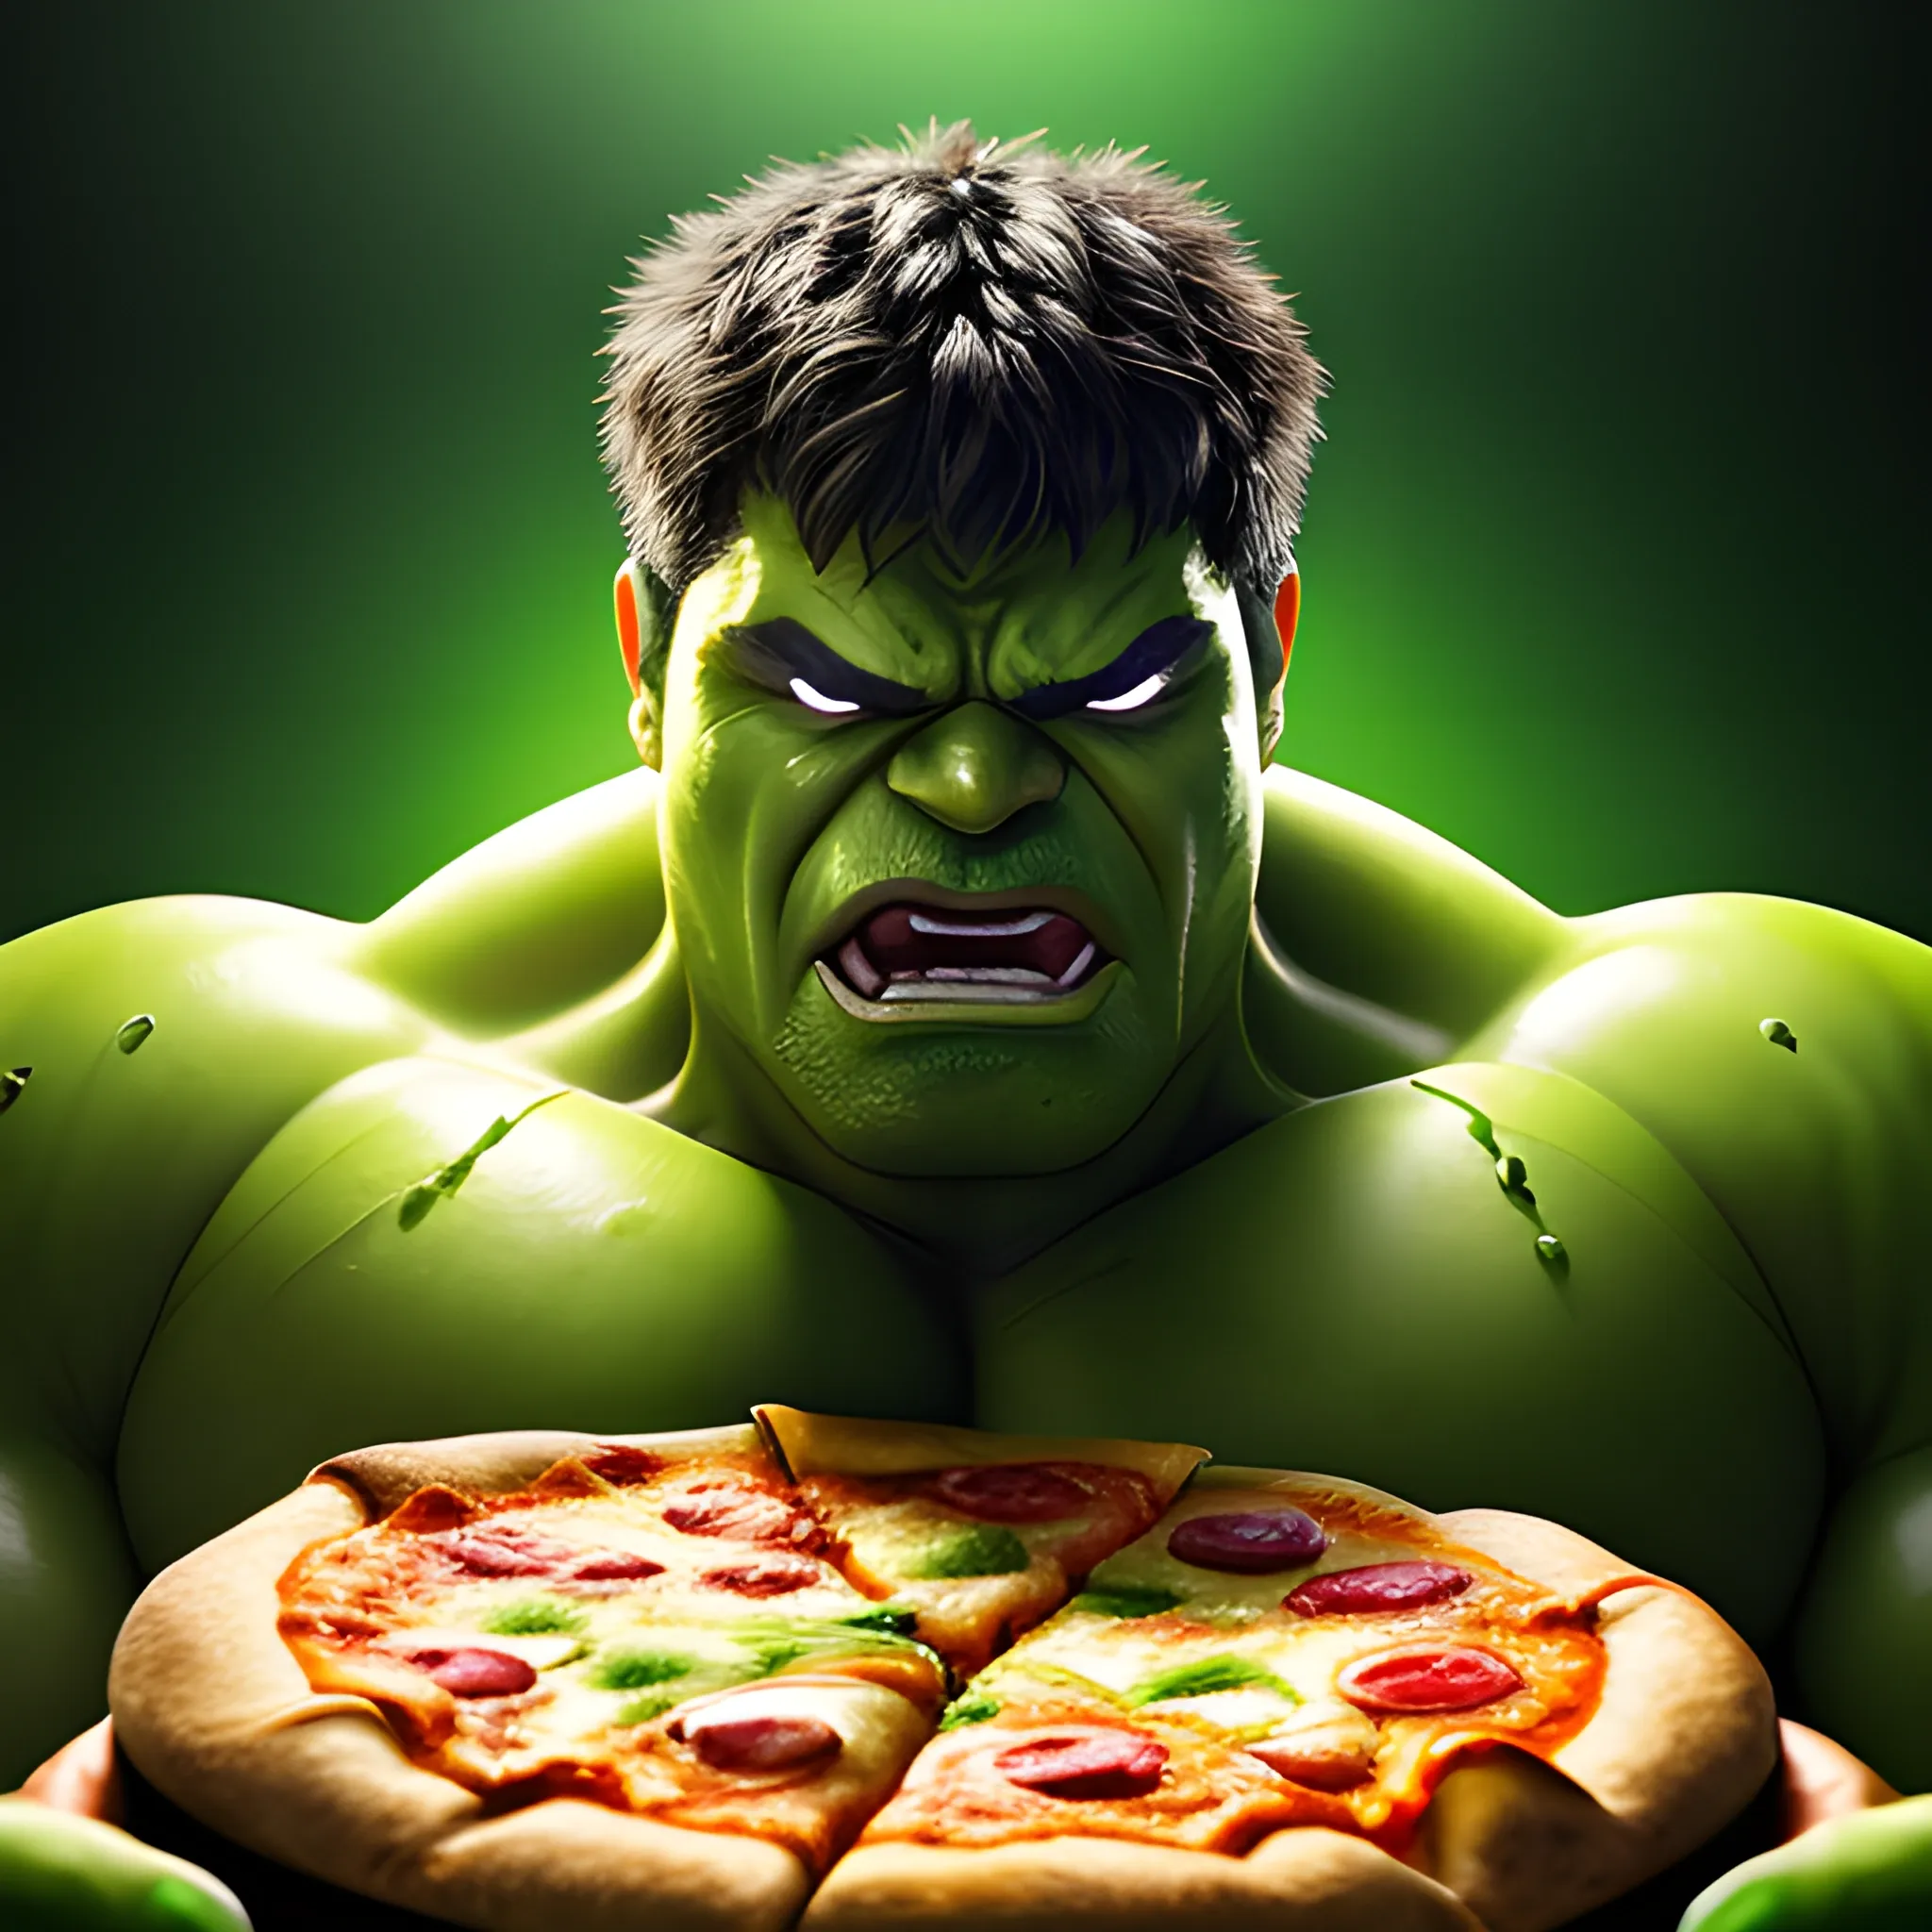 green Hulk with cybernetic enhancement, biting pizza slice, cheese dripping pizza , soft studio lighting and edge highlights, luxurious cyberpunk background, hyper-realistic, 4k image,